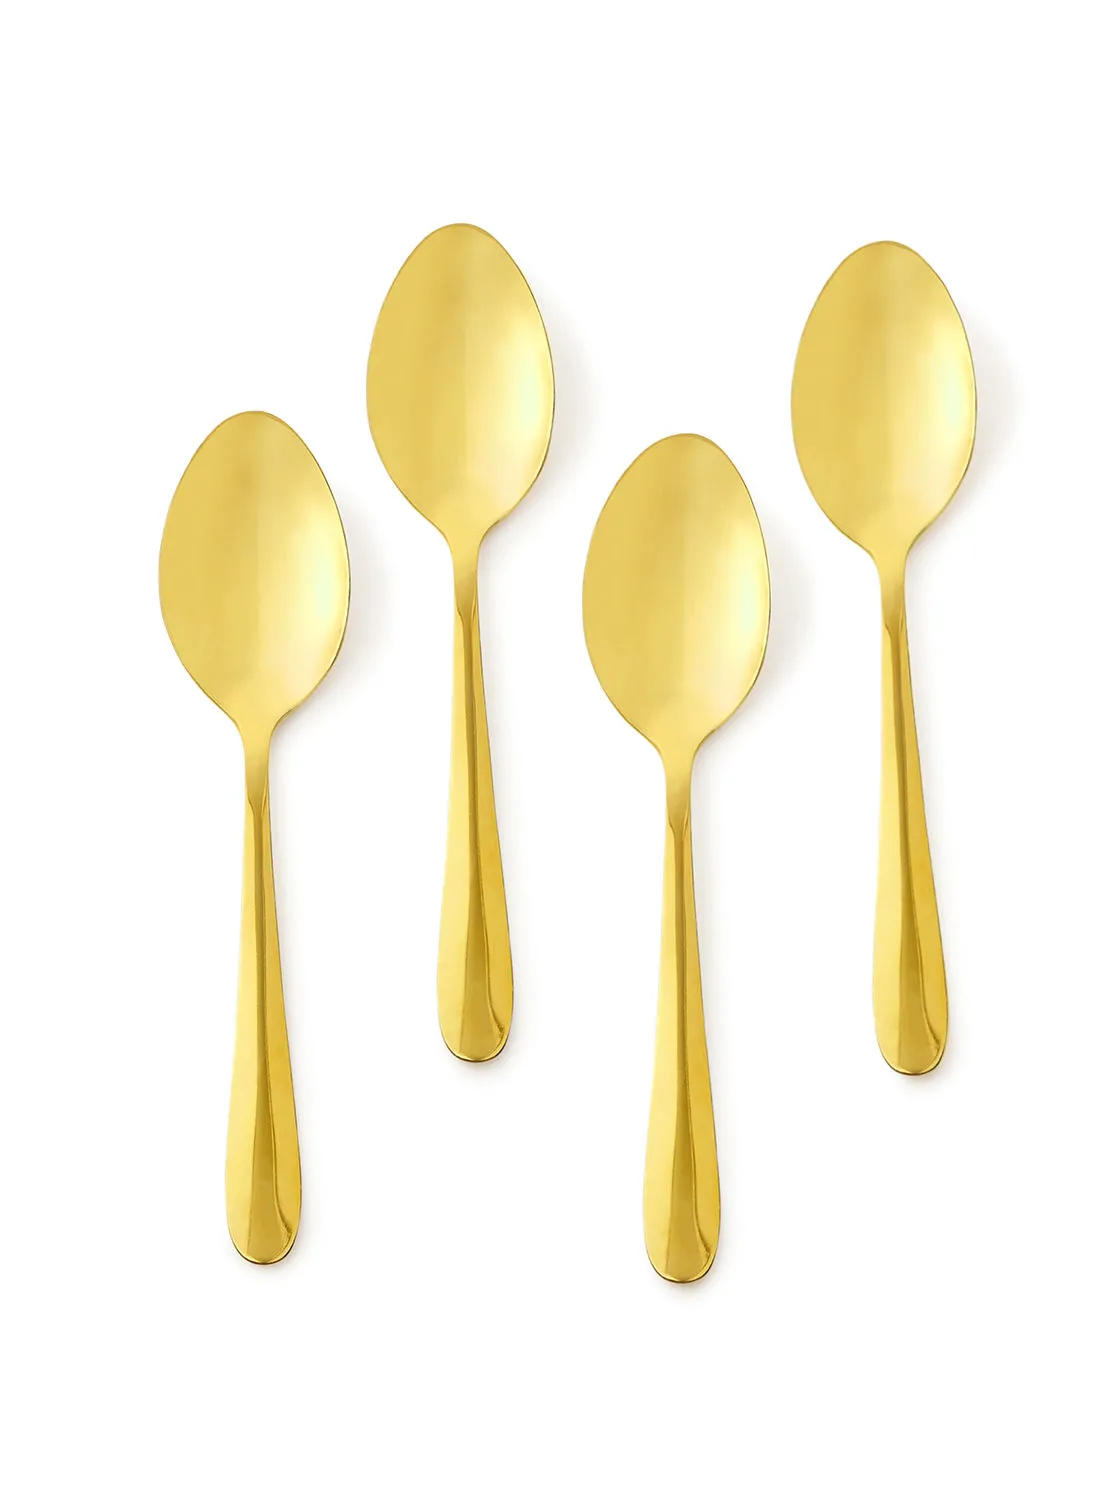 Amal 4 Piece Tablespoons Set - Made Of Stainless Steel - Silverware Flatware - Spoons - Spoon Set - Table Spoons - Serves 4 - Design Gold Daisy